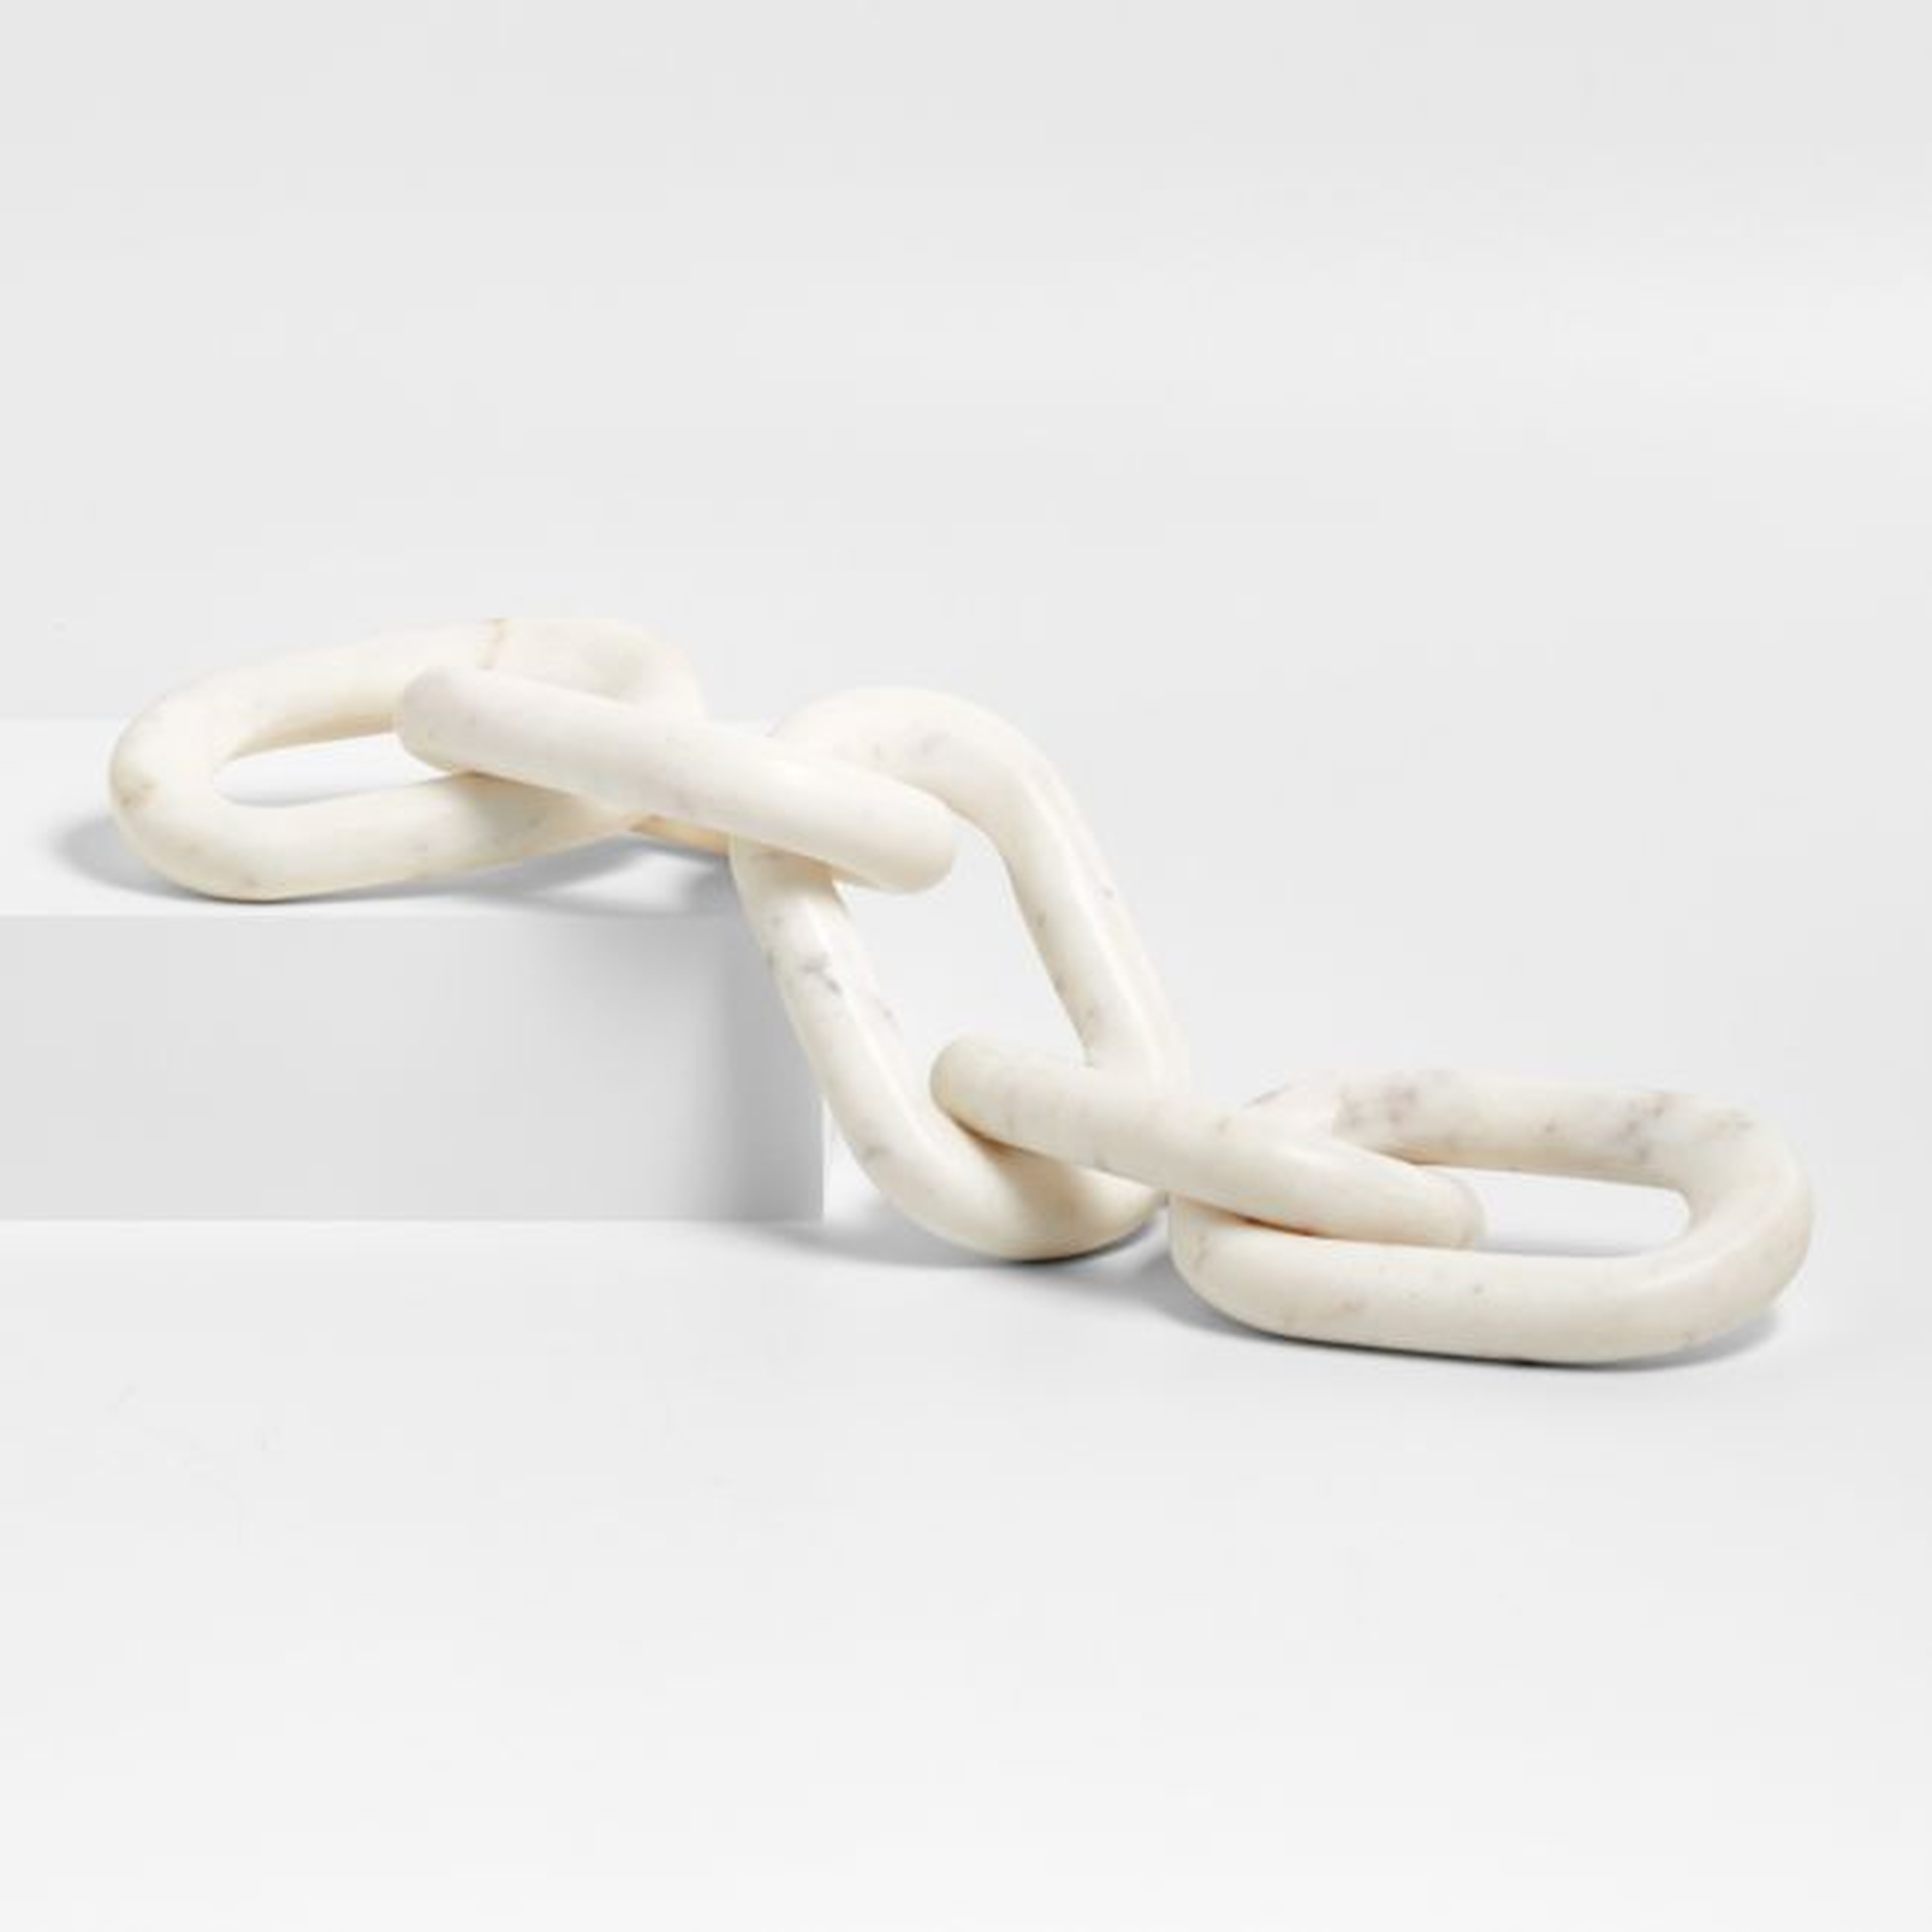 White Marble Links Decorative Chain - Crate and Barrel